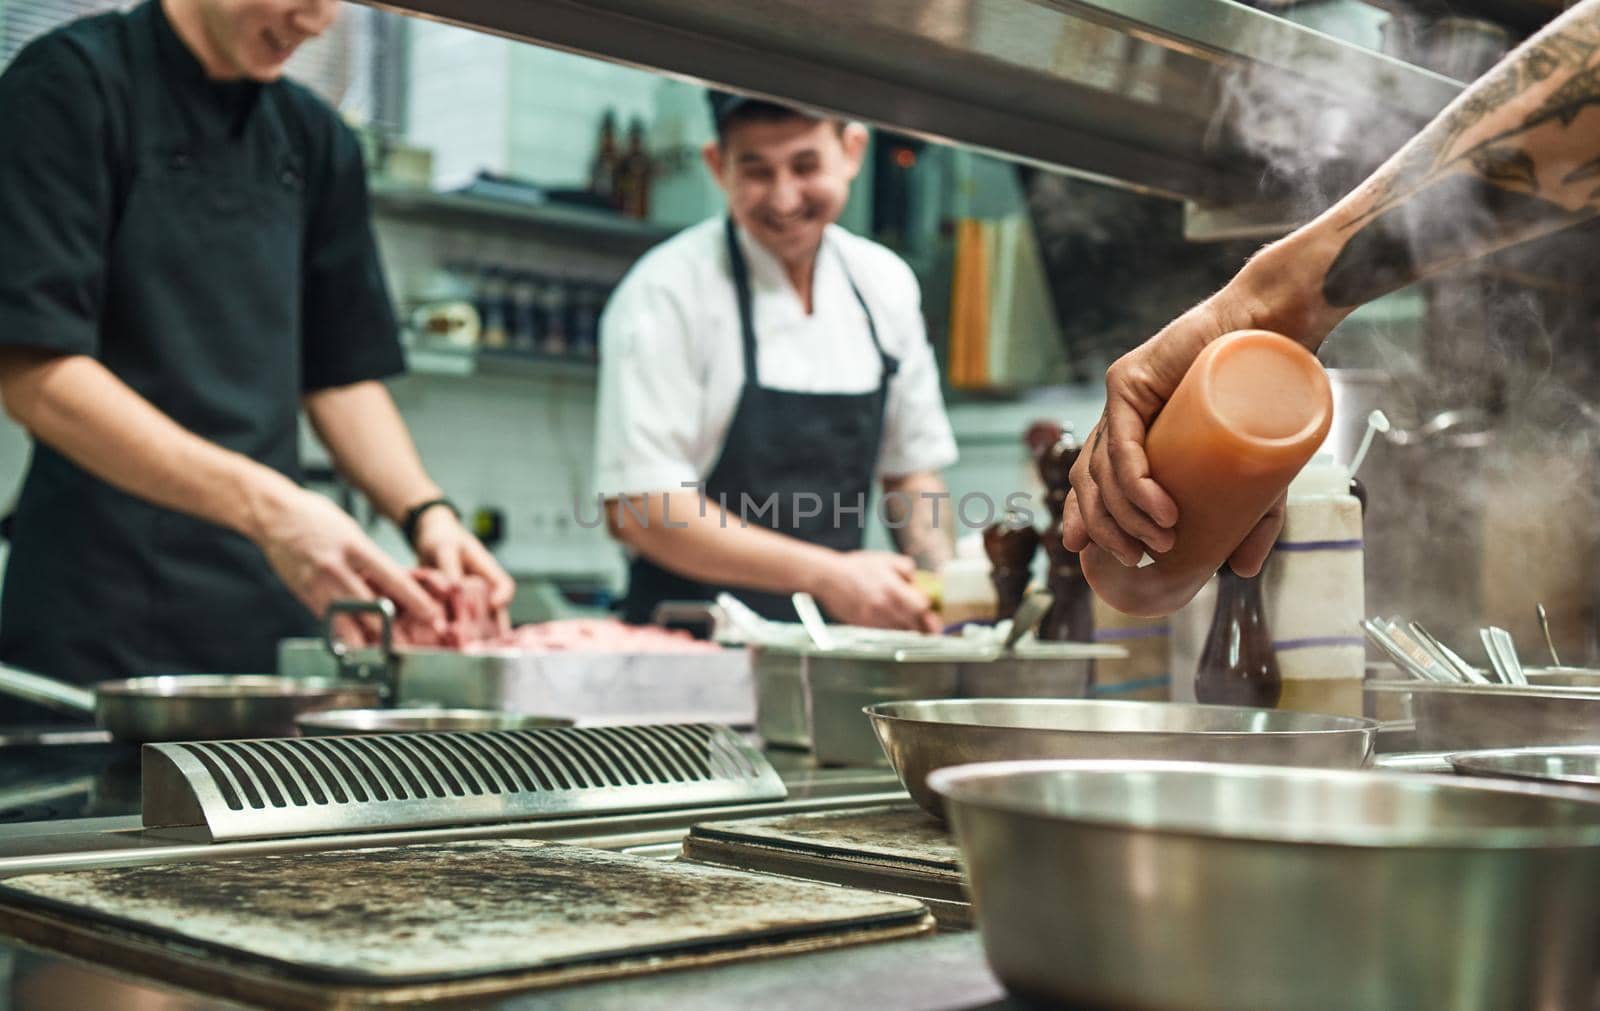 Professional team. Cheerful young cooks preparing food together in a restaurant kitchen. Cooking concept